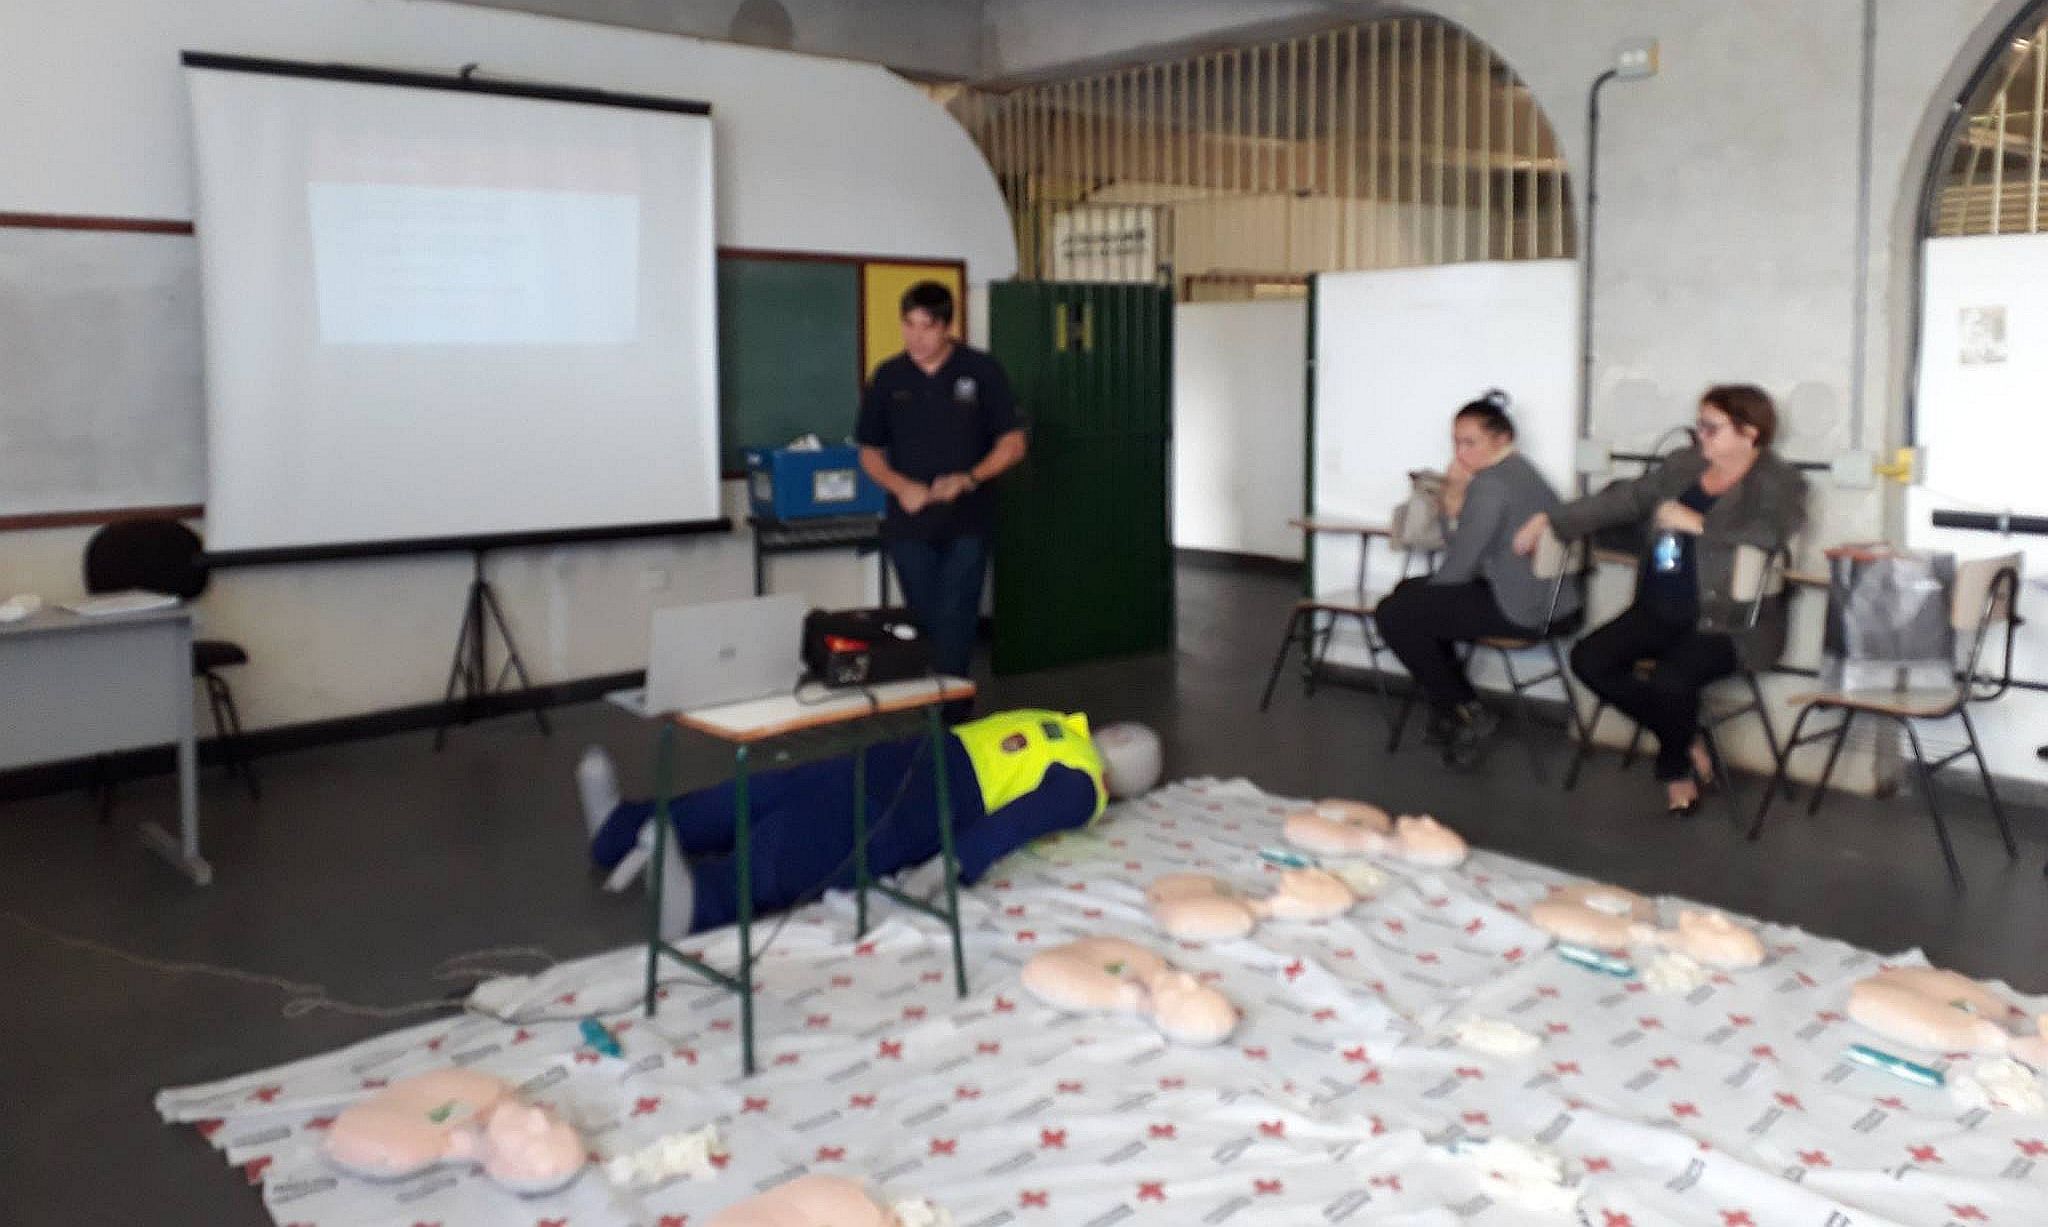 First aid classes for city school teachers and teachers' aids